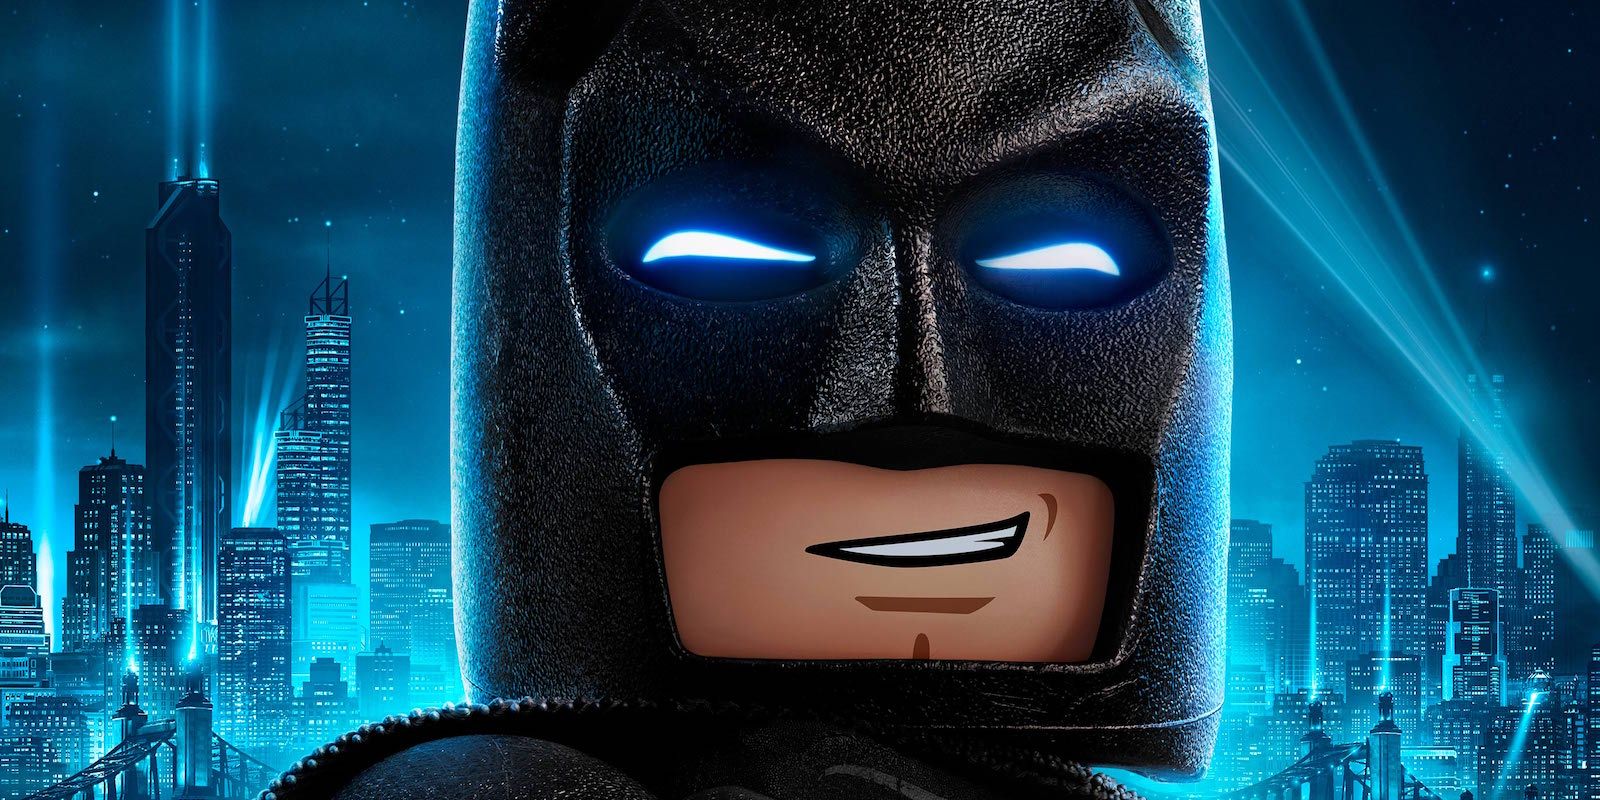 LEGO Batman Soundtrack: Fall Out Boy Lead Singer Performs First Song